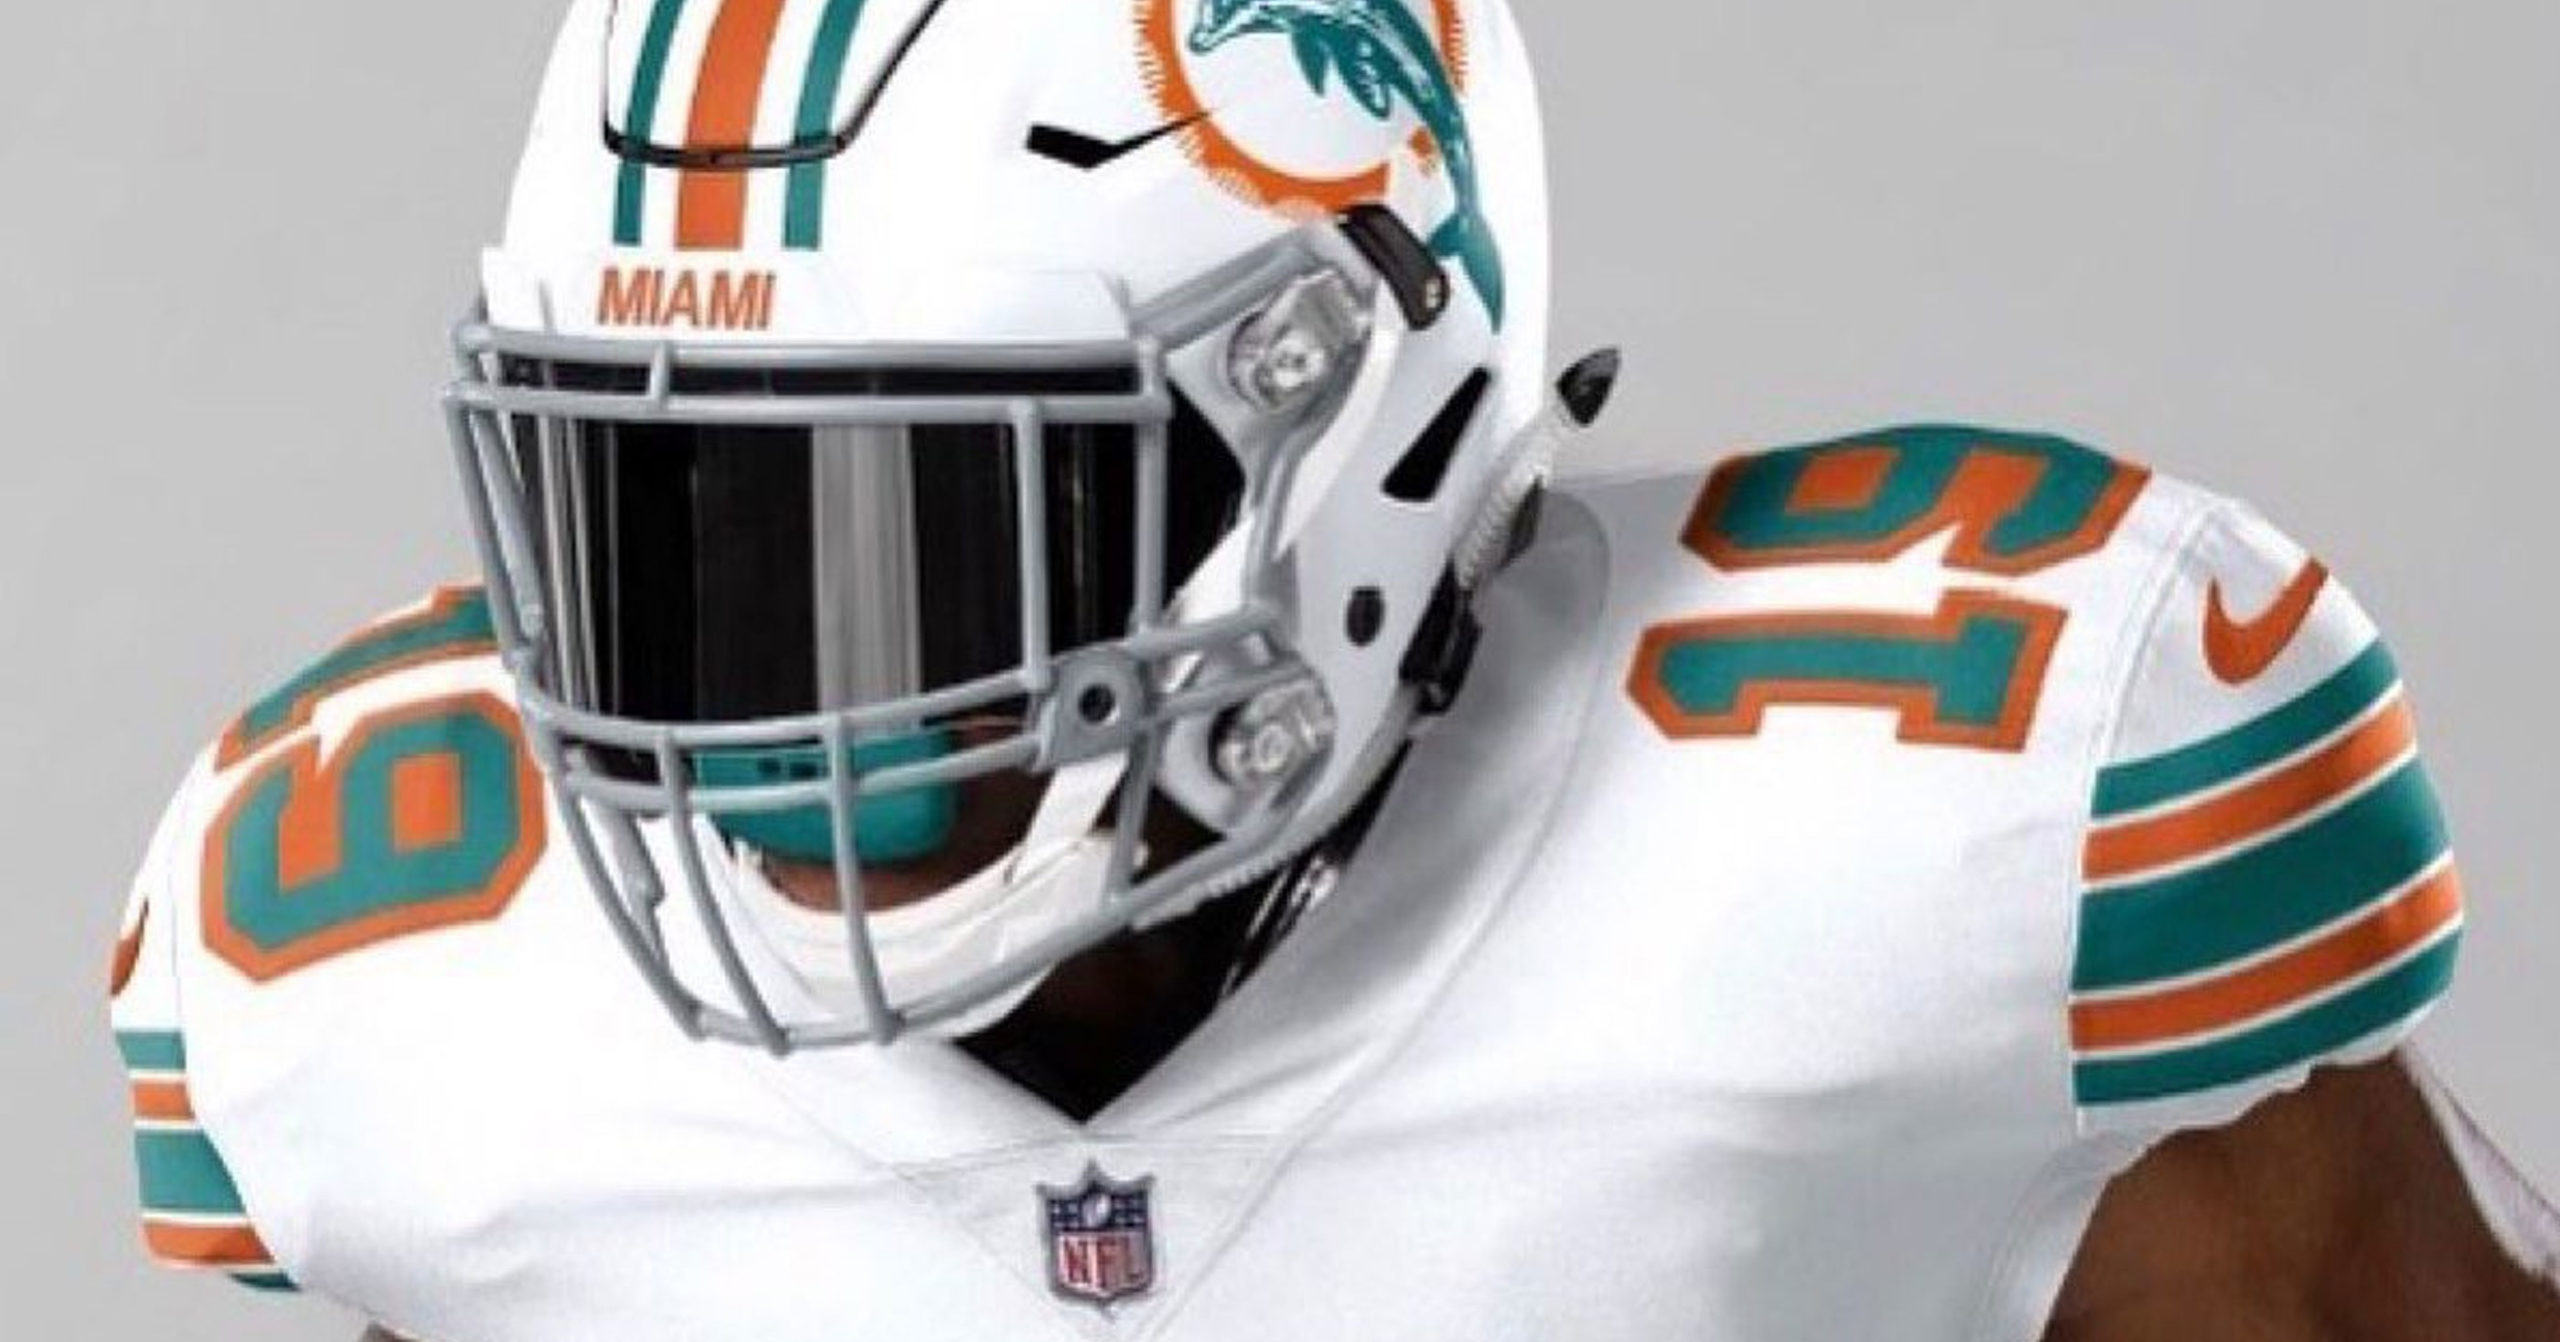 Miami Dolphins throwback jerseys have fan in Brian Flores